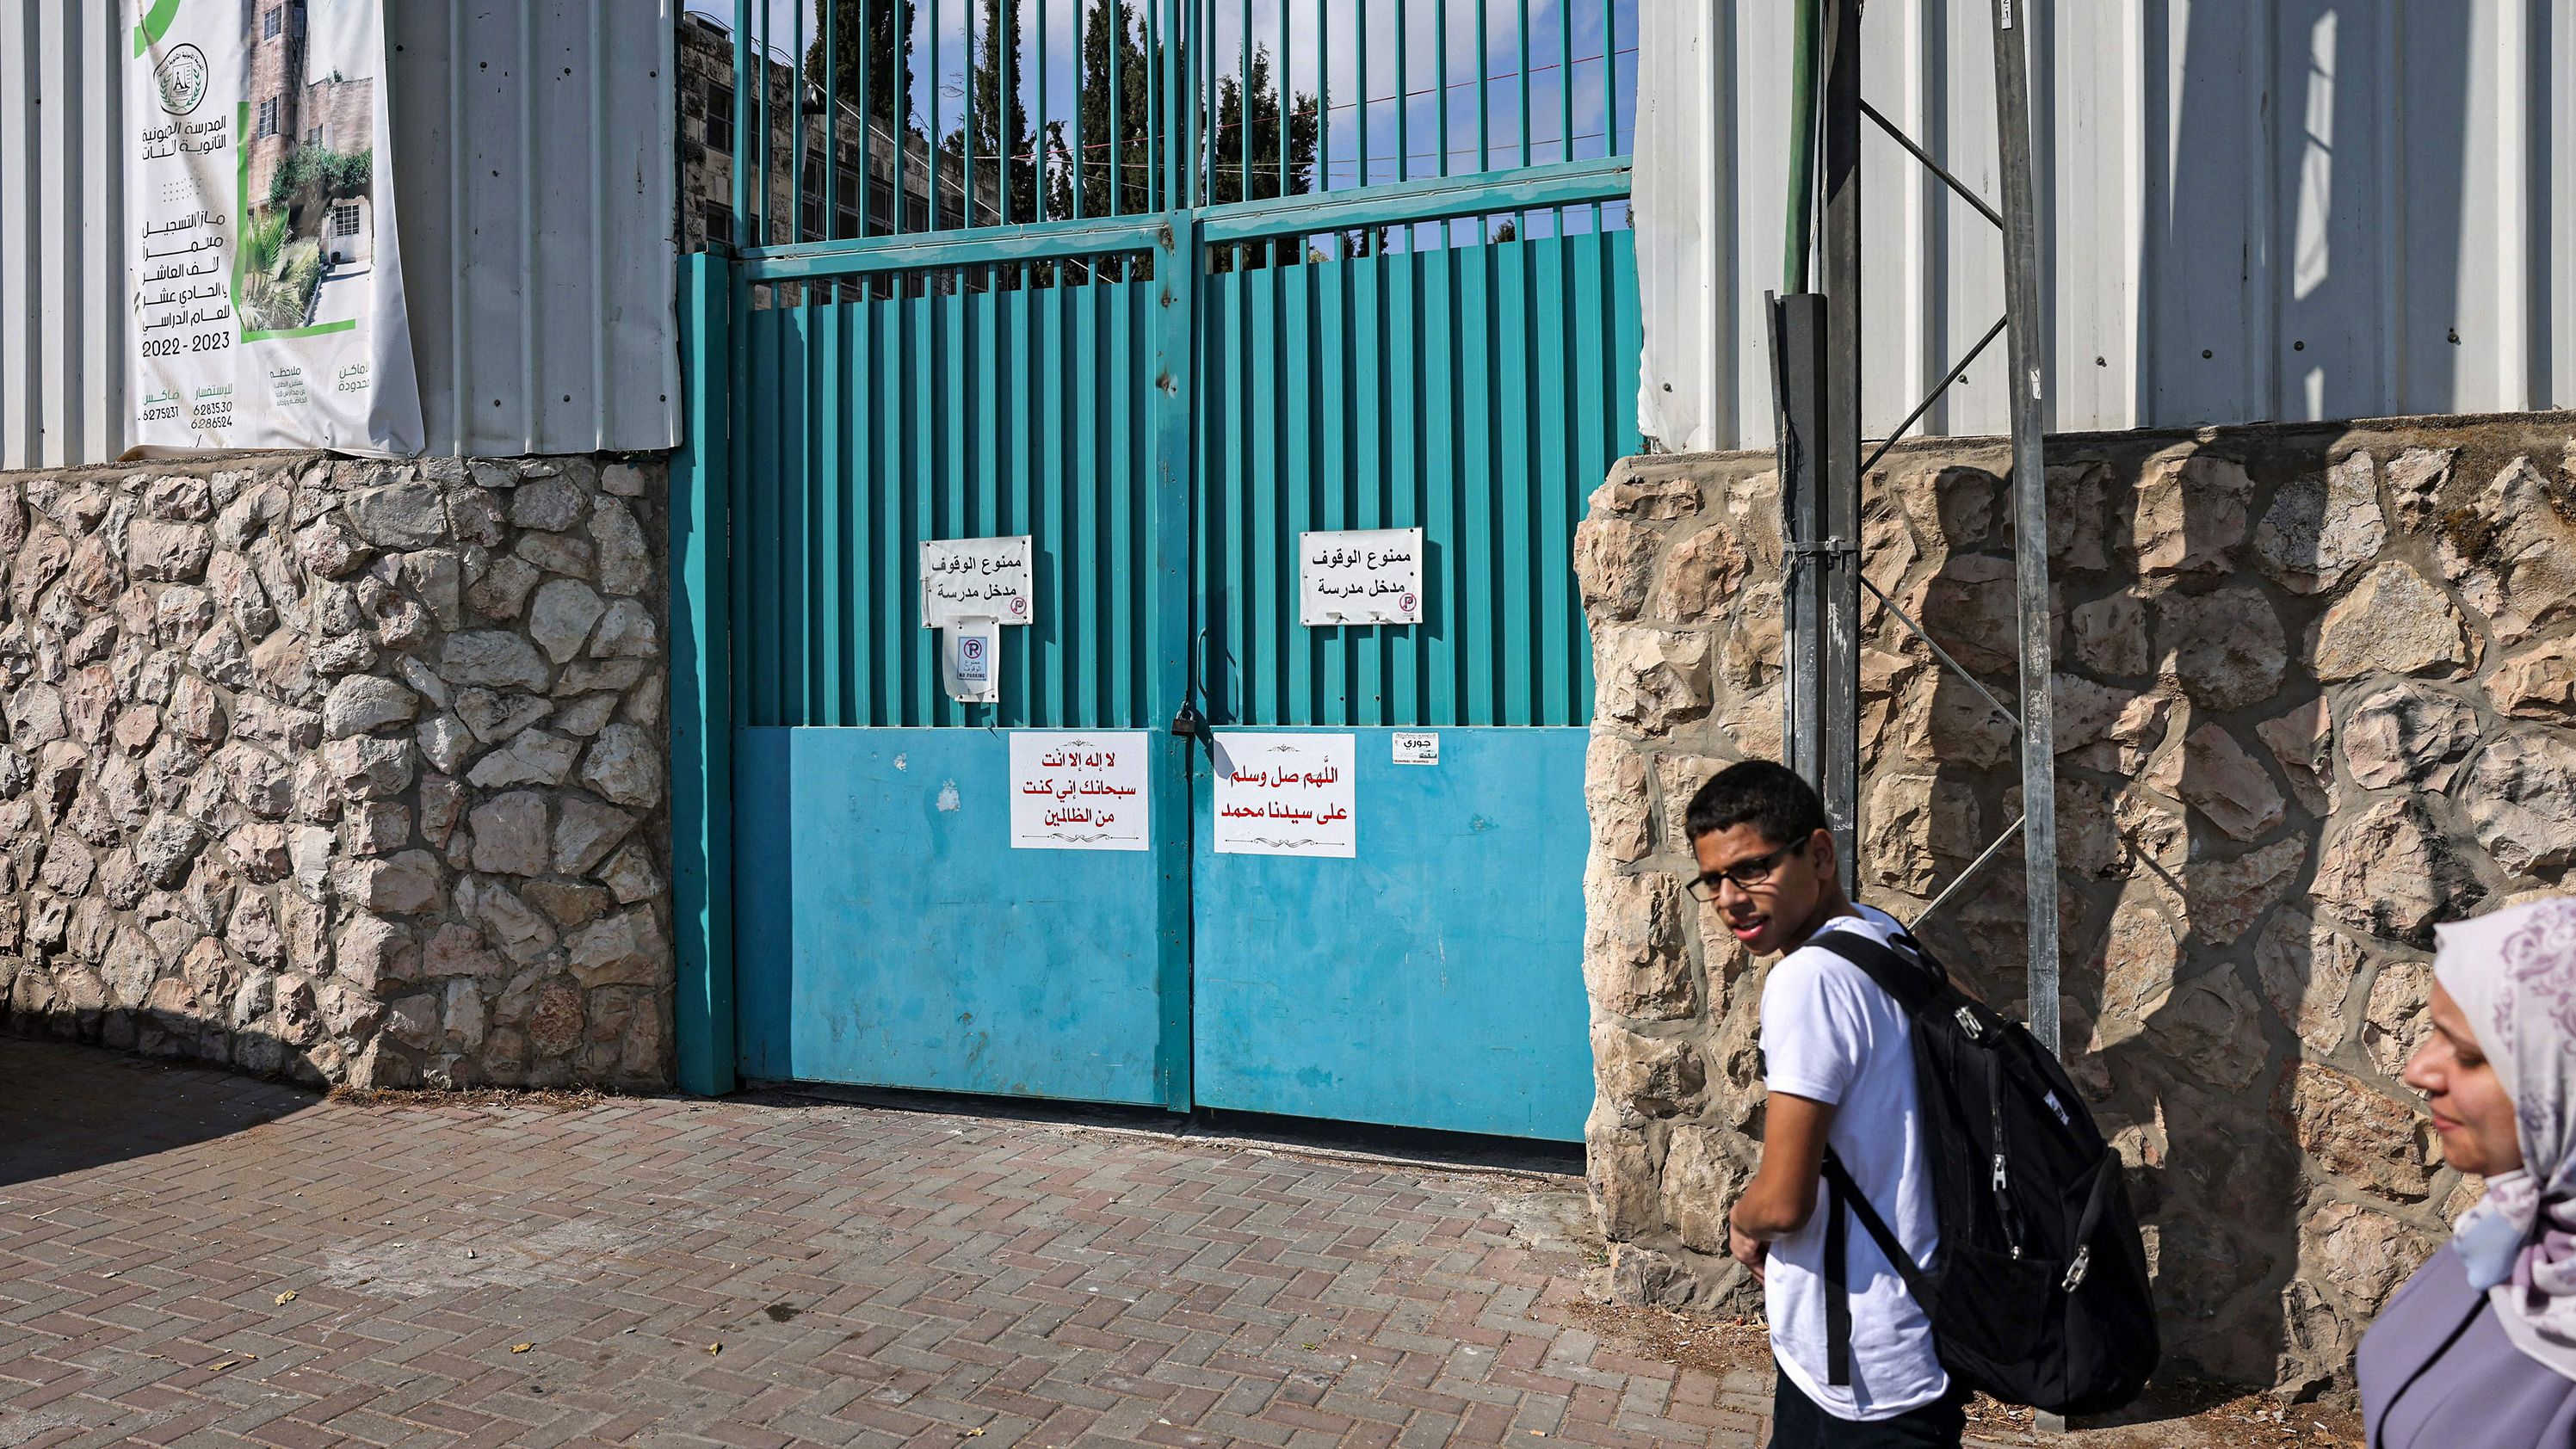 A Palestinian secondary school for girls in East Jerusalem is closed while on strike on September 19 in protest against a new Israeli-imposed curriculum.